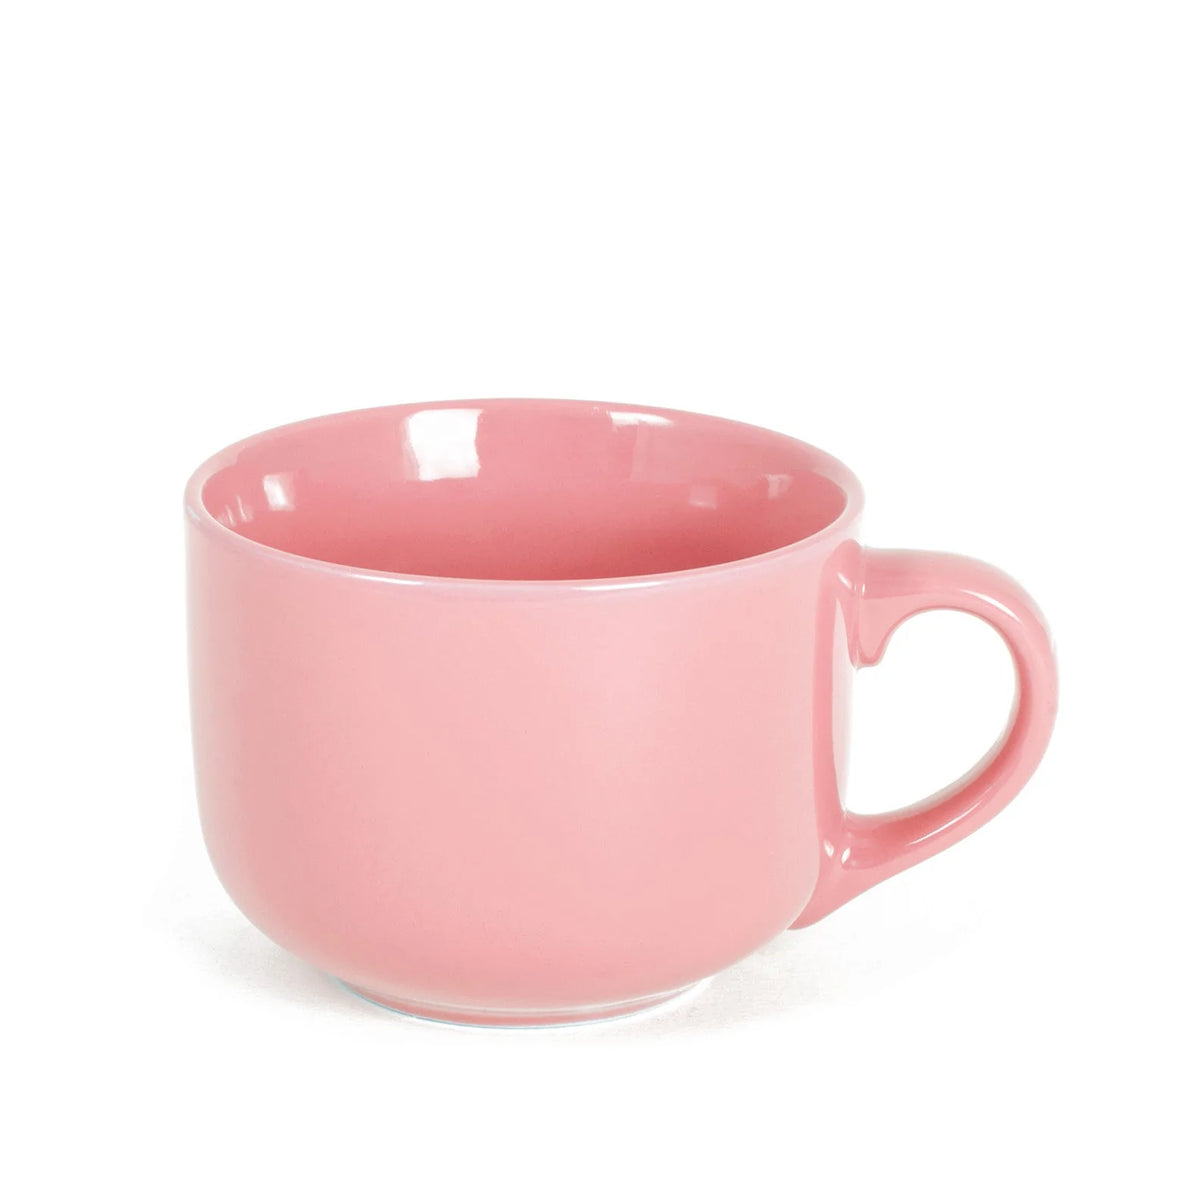 Cup with rose stone handle 470ml